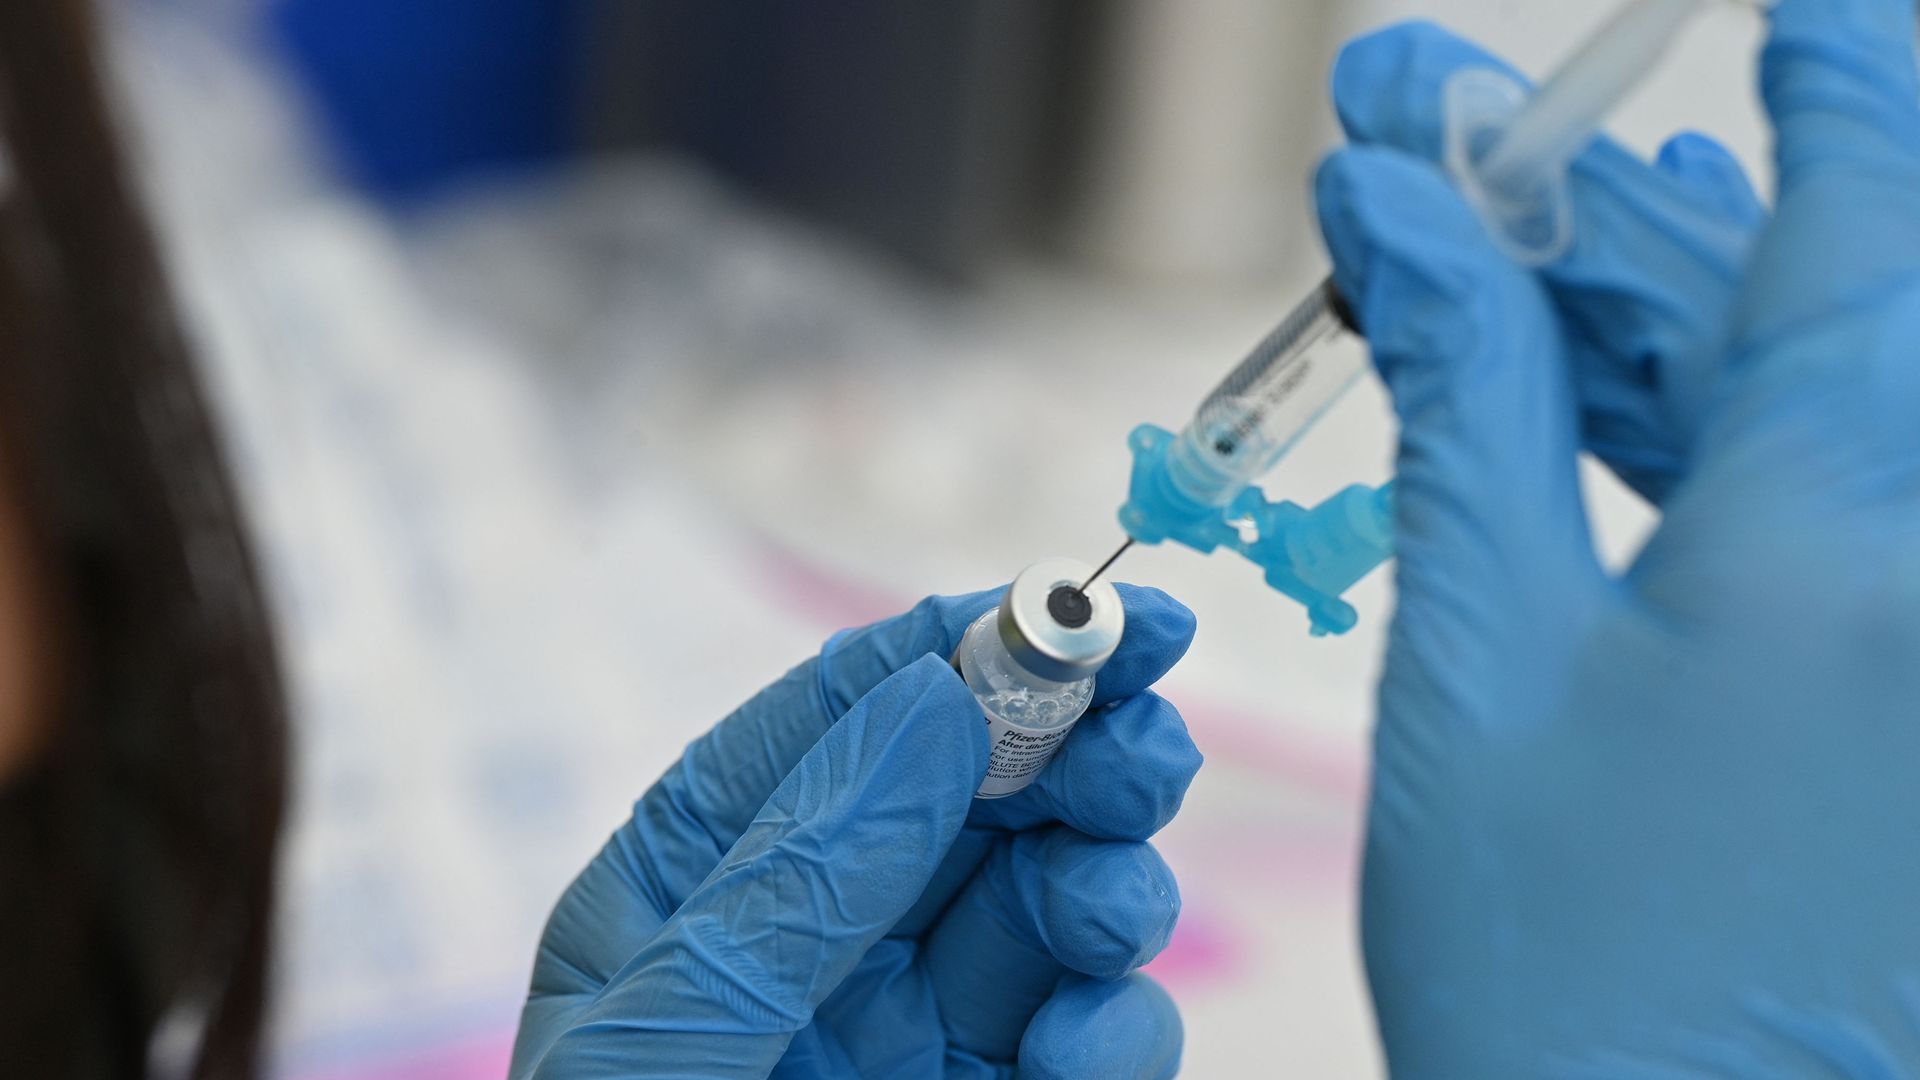 A healthcare worker fills a syringe with Pfizer Covid-19 vaccine syringe